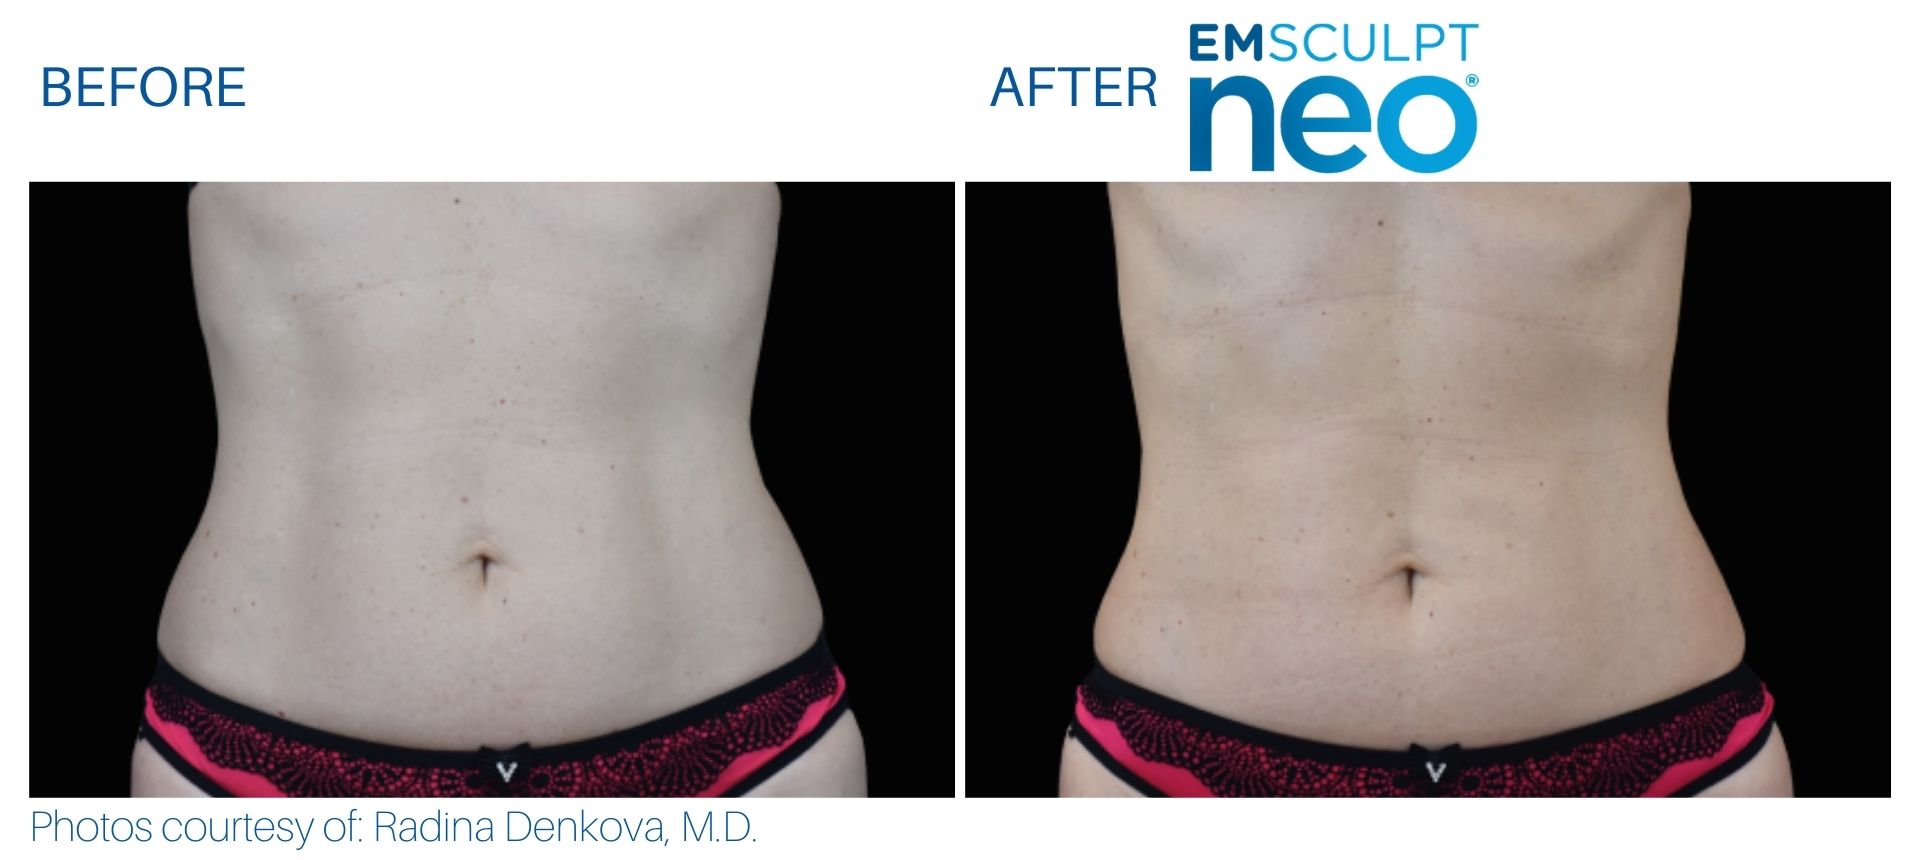 Stomach Before And After Emsculpt Neo Treatment At Optimum Human.